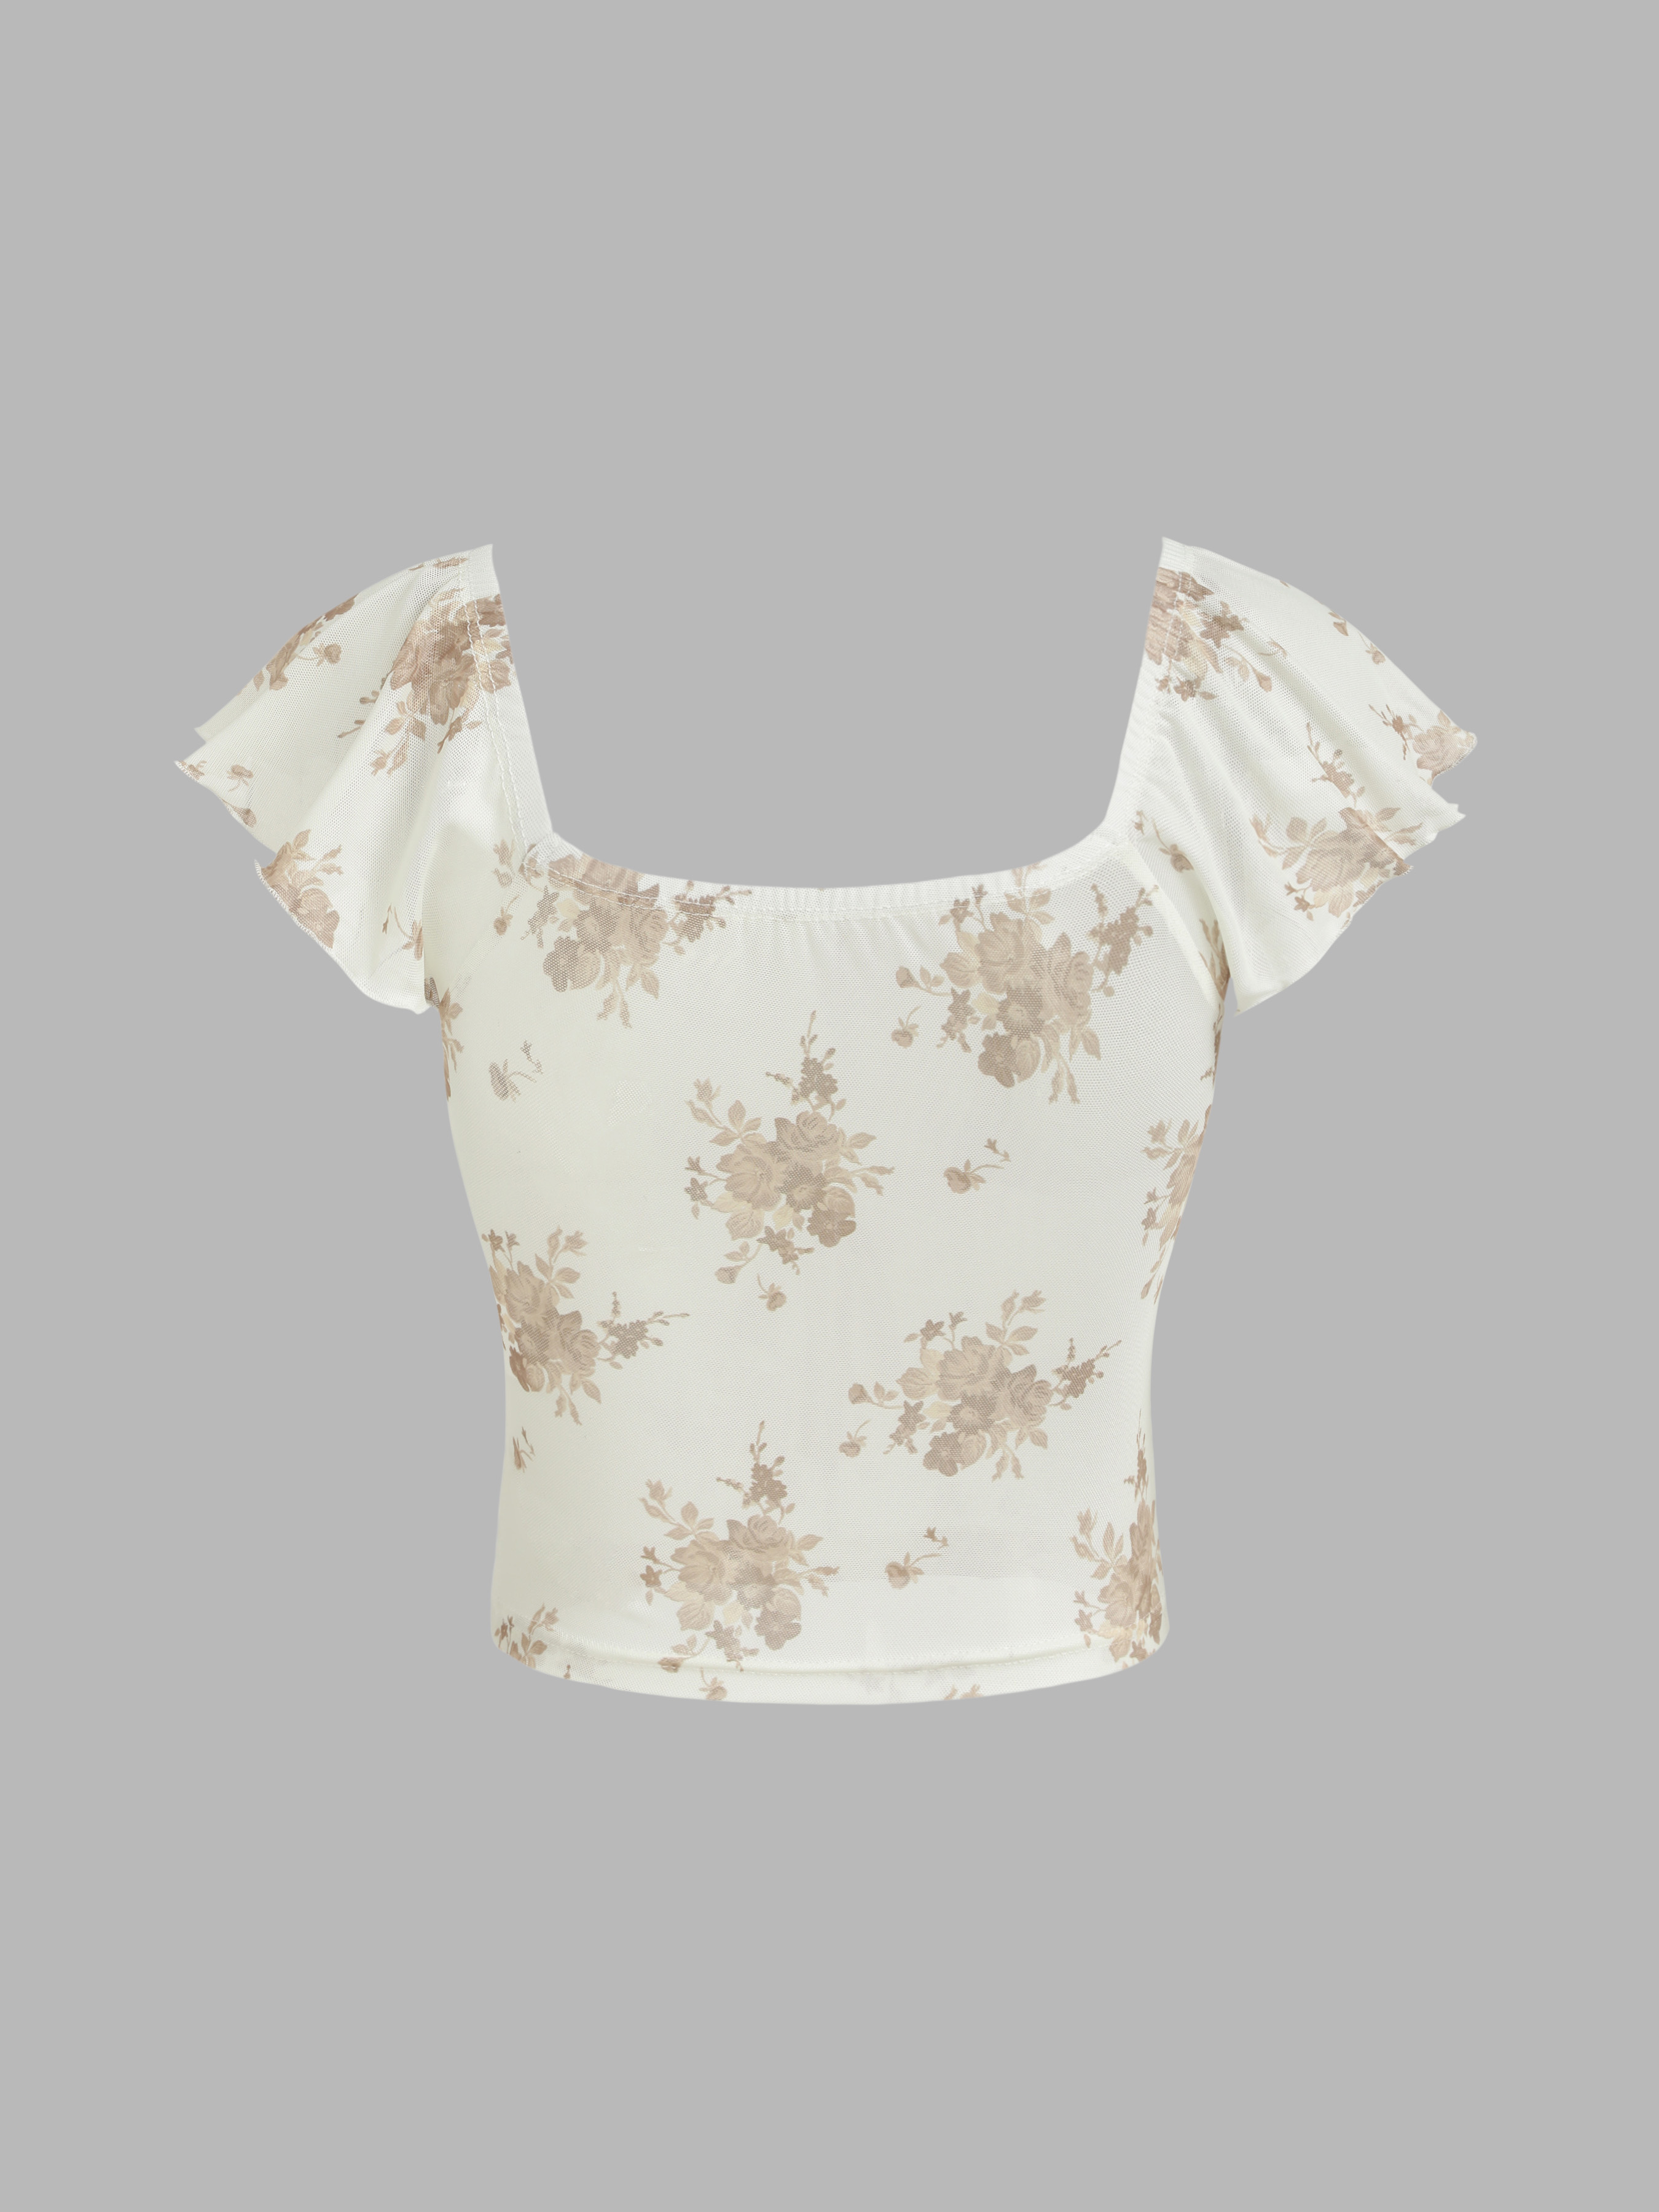 Flourish & Bloom Knotted Crop Top